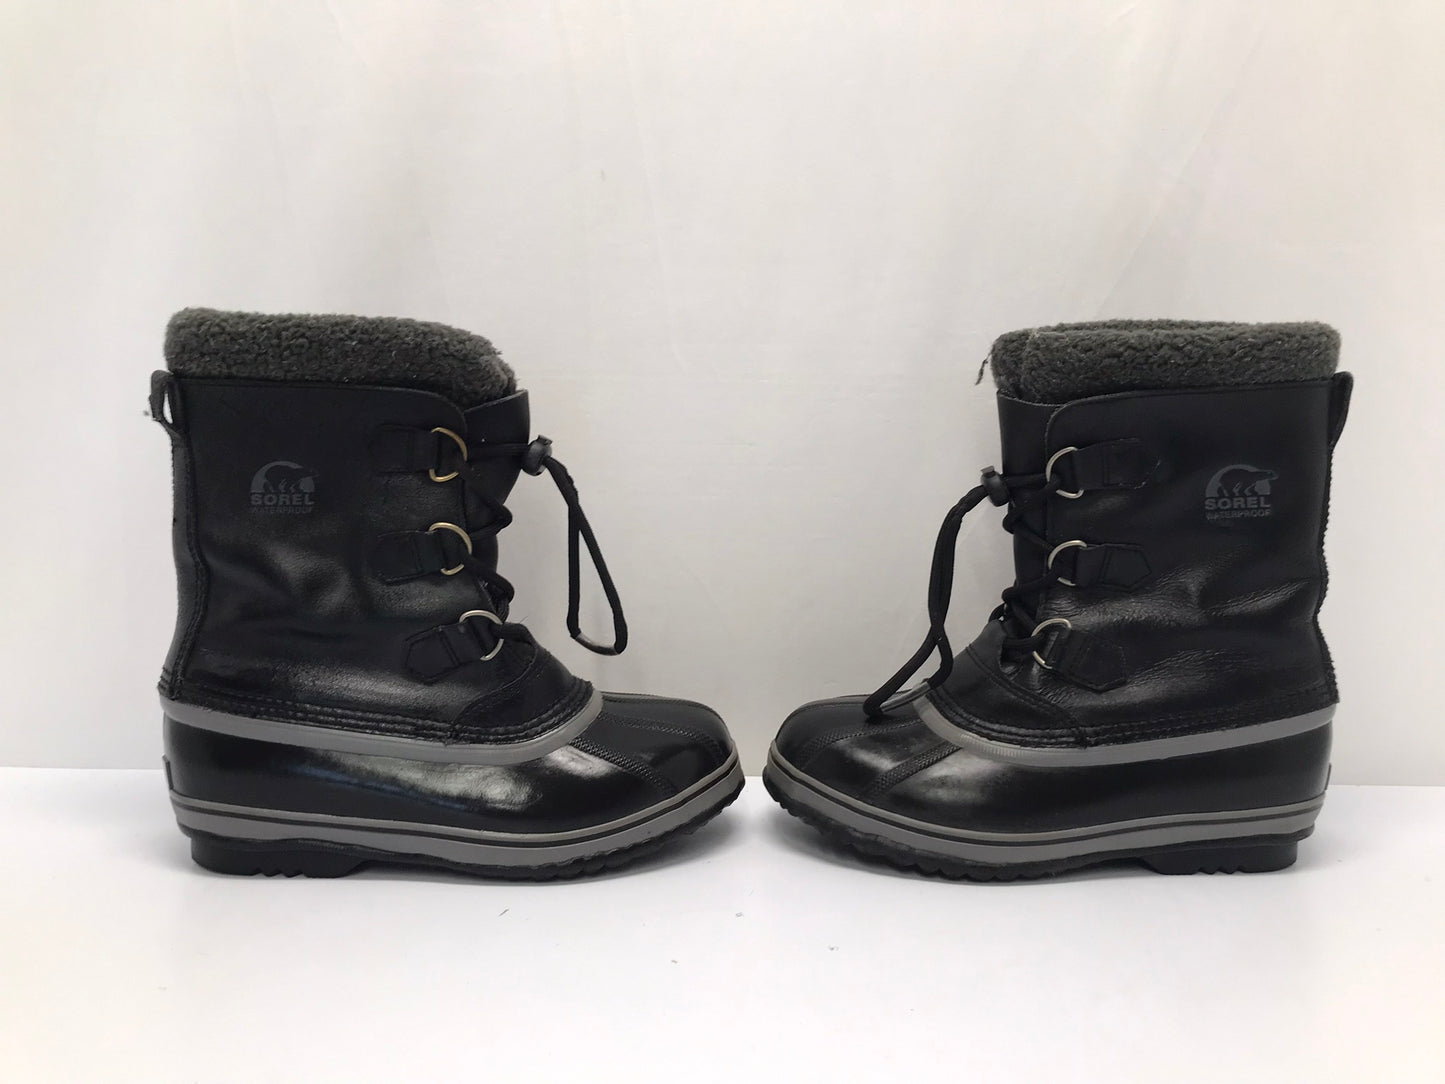 Winter Boots Child Size 6 Youth Sorel Black Leather With Liners